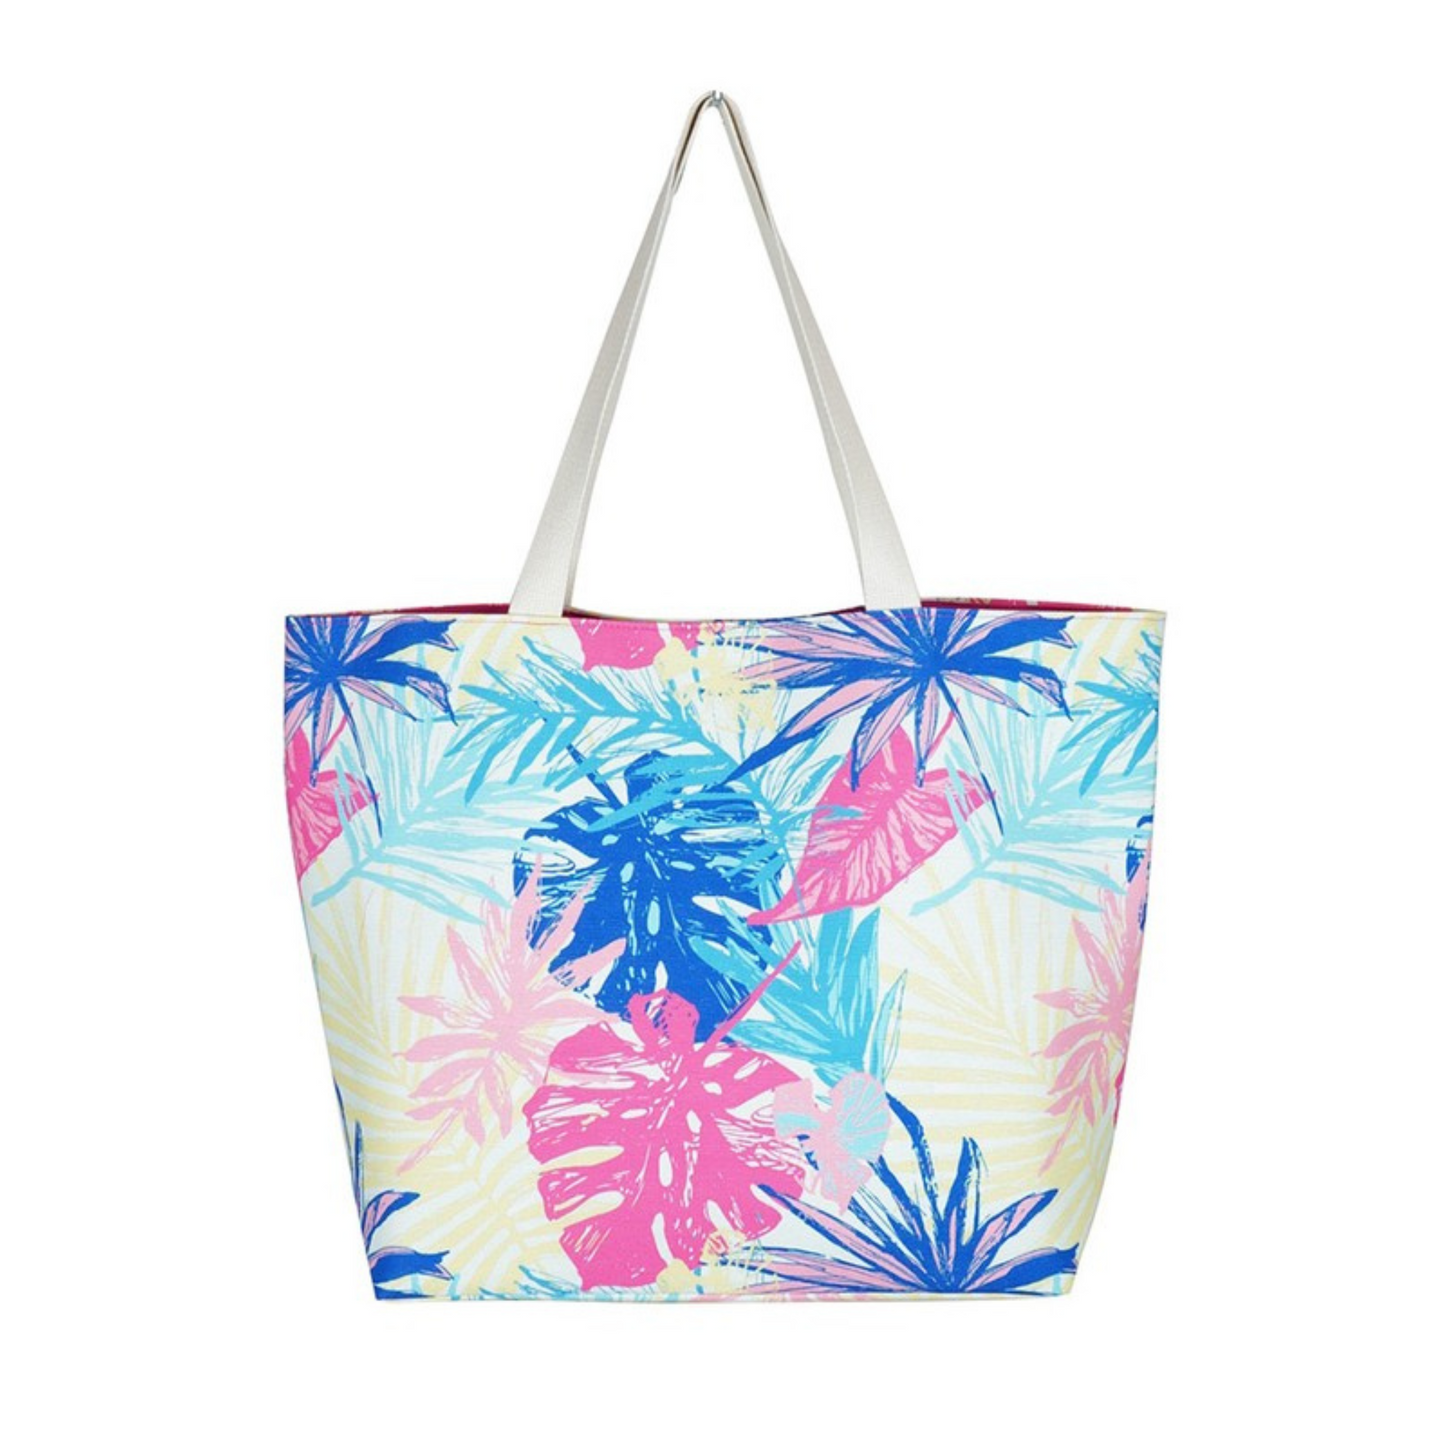 The Tropical Tote is perfect for days at the beach or when you're on the go. Its unique tropical print and pink, blue and green colors will make you stand out in the crowd. Crafted from lightweight material, this beach bag is durable and travel-friendly.